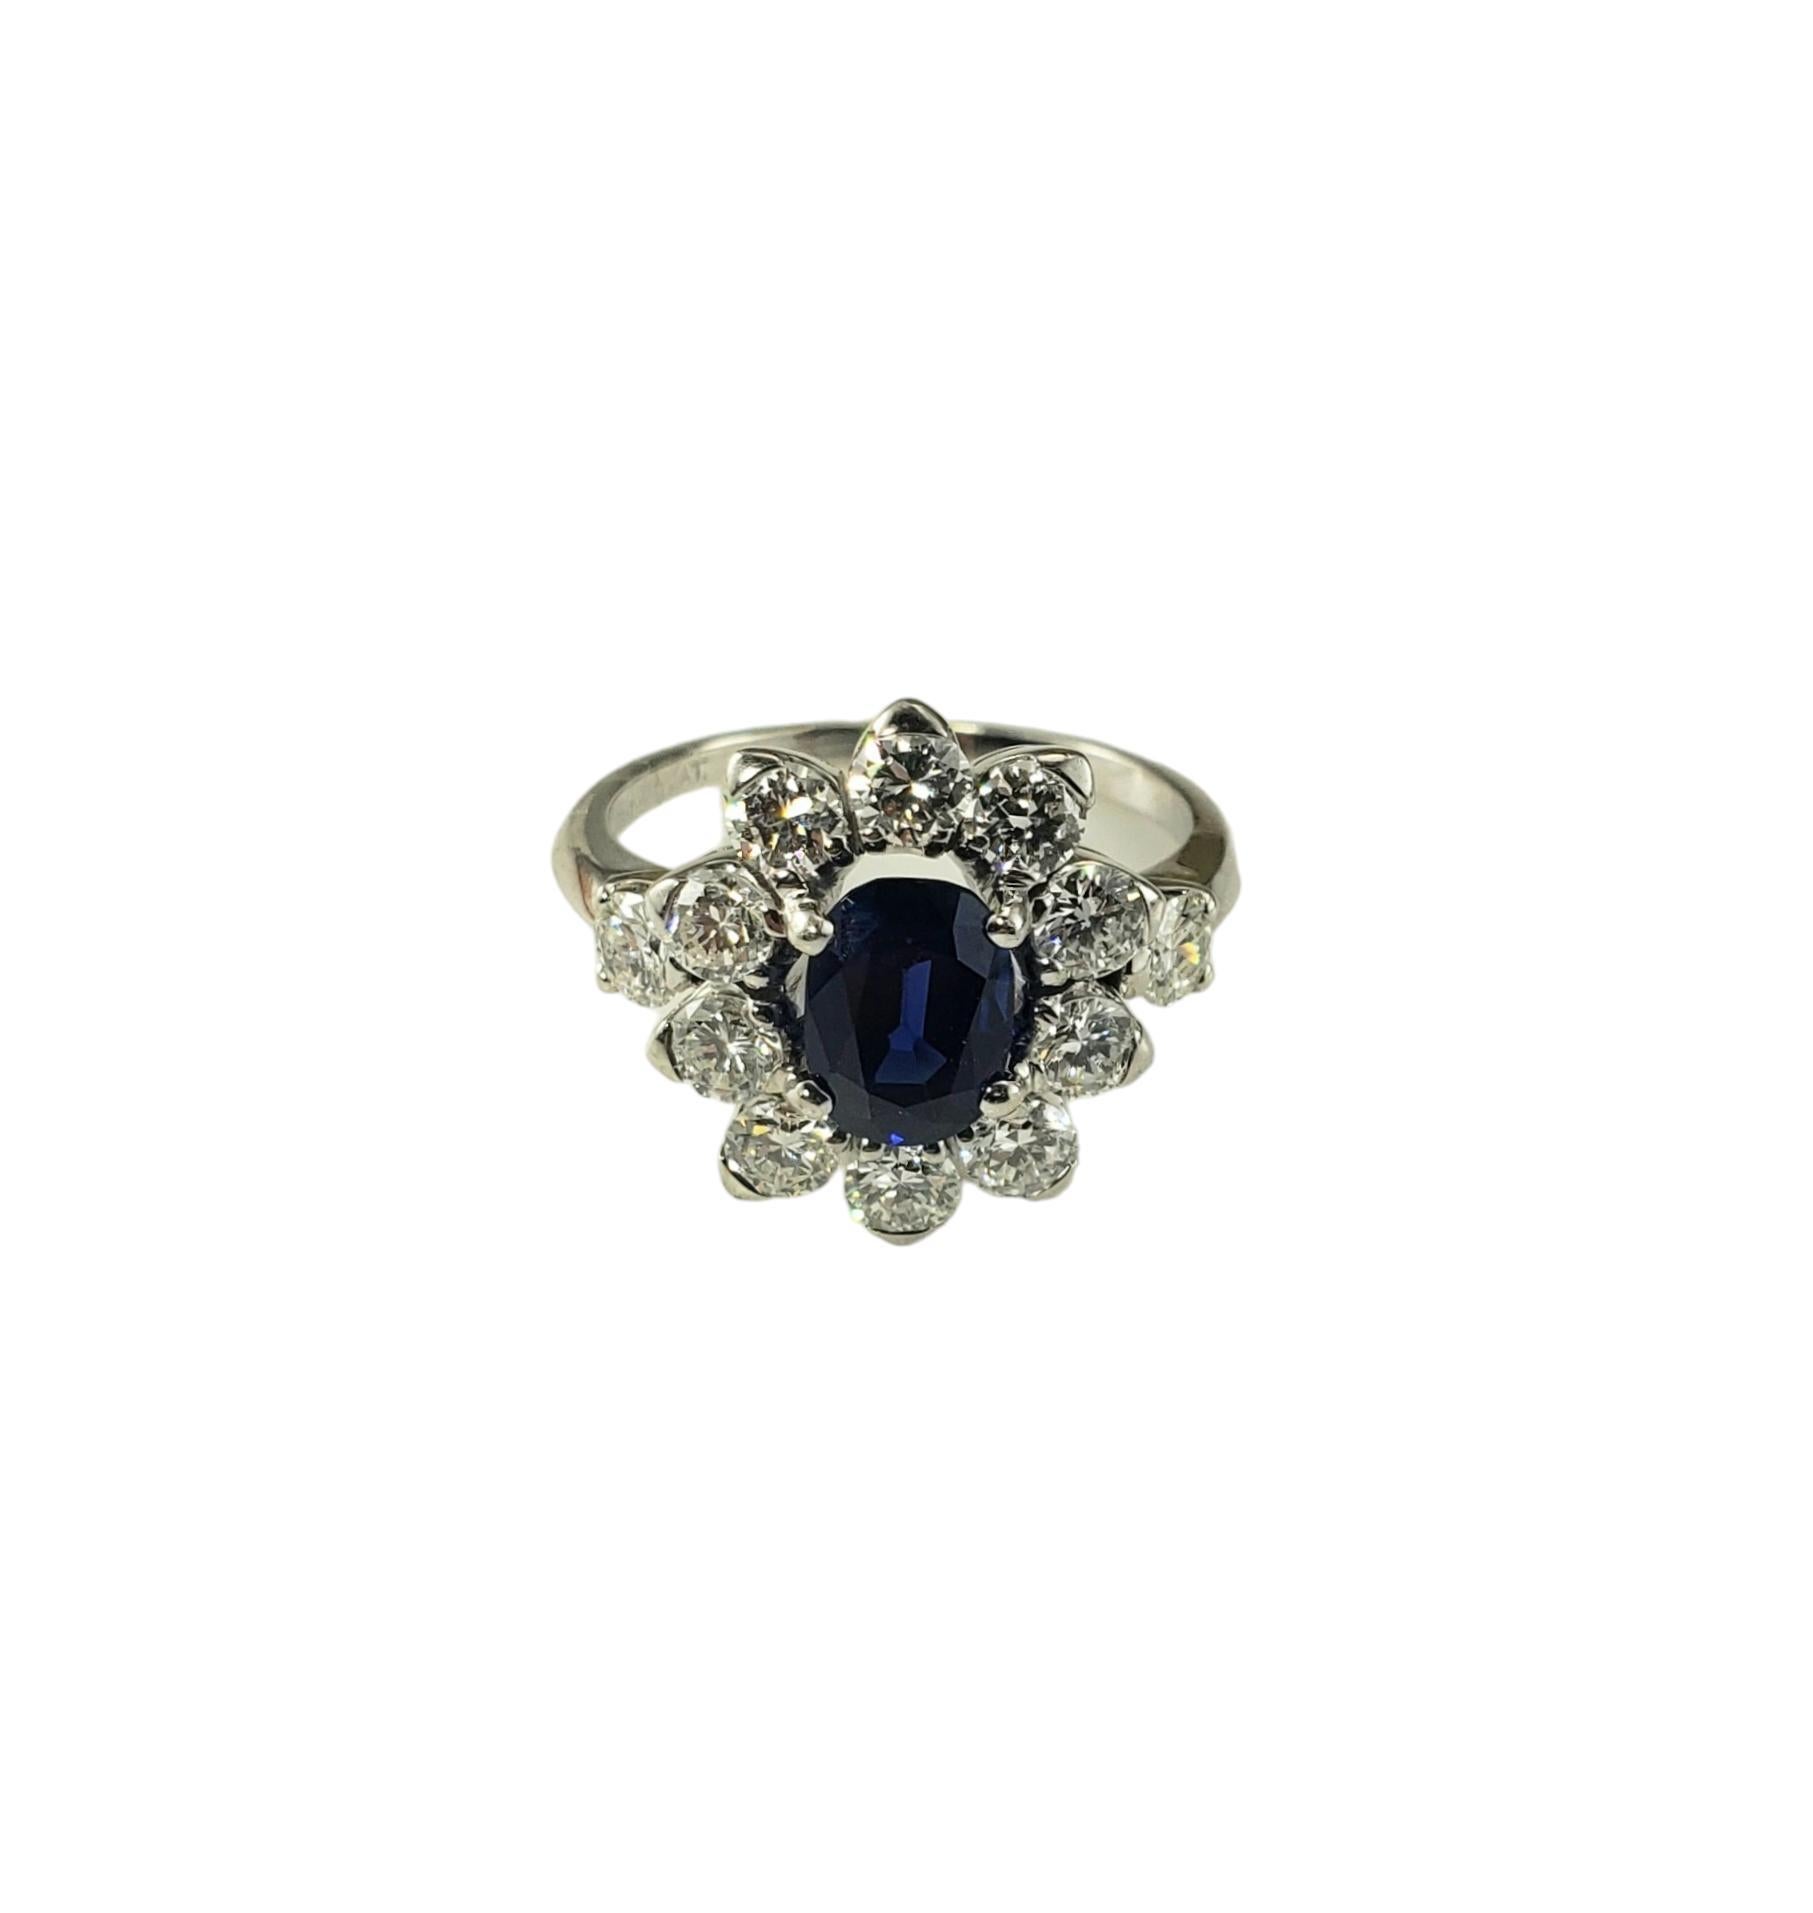 Platinum Sapphire and Diamond Ring Size 5.75 JAGi Certified-

This stunning ring features one oval natural blue sapphire (7.3 mm x 5.4 mm) surrounded by 12 round brilliant cut diamonds set in classic platinum. 

Width: 15 mm. Shank: 1.5